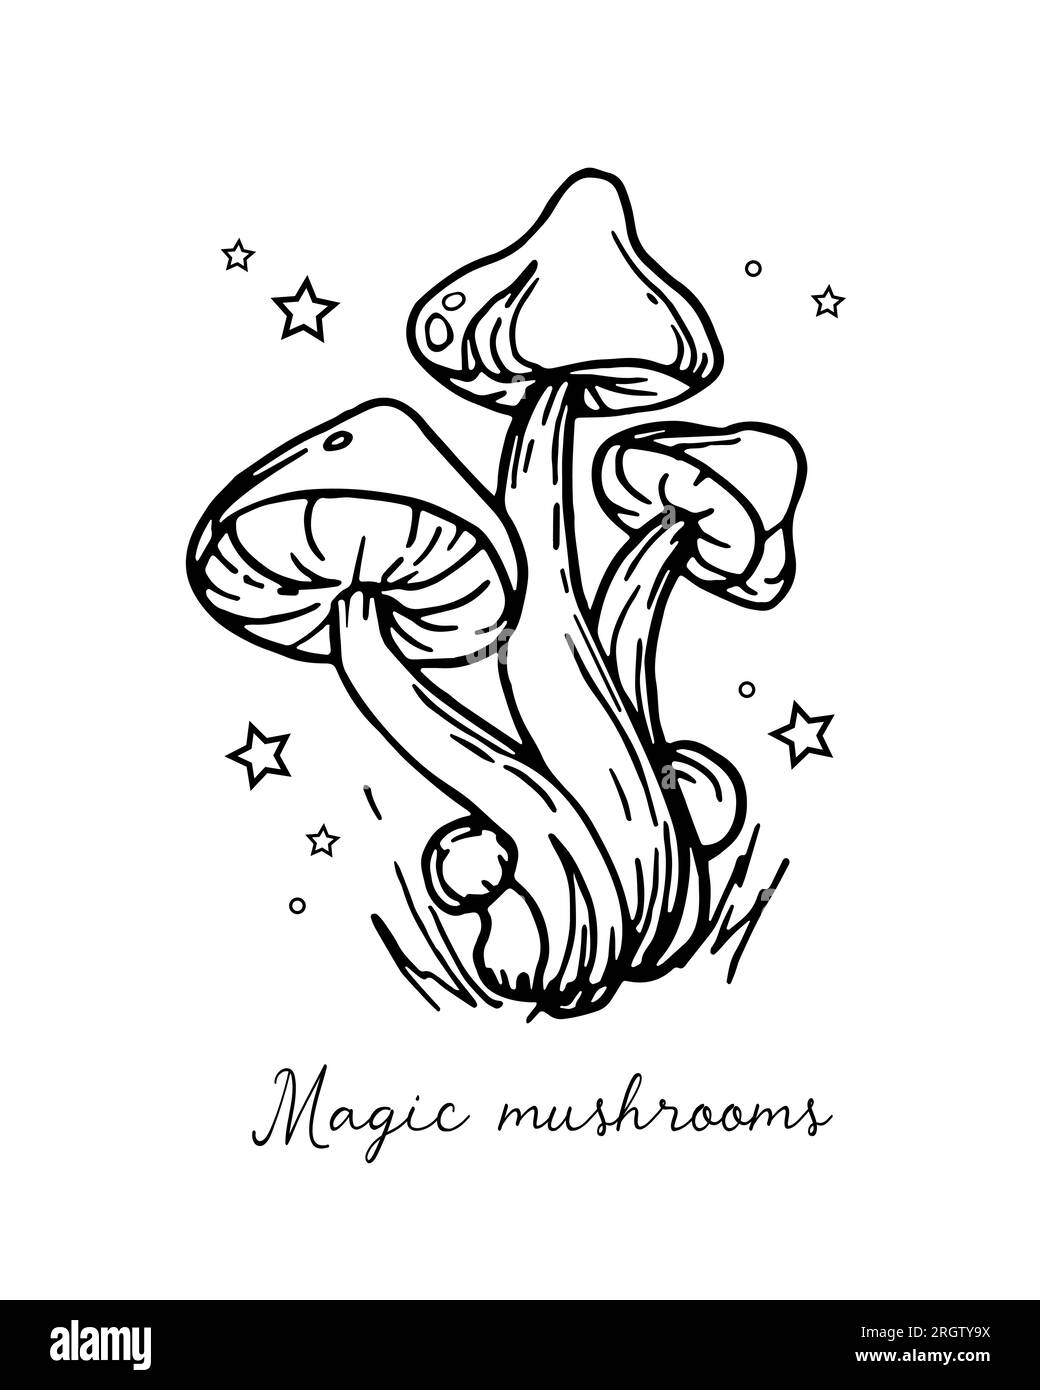 Graphic vintage mushrooms with stars. Botanical illustrations. Witch mushrooms for Halloween. Graphic vintage doodle illustration with space magic mus Stock Vector